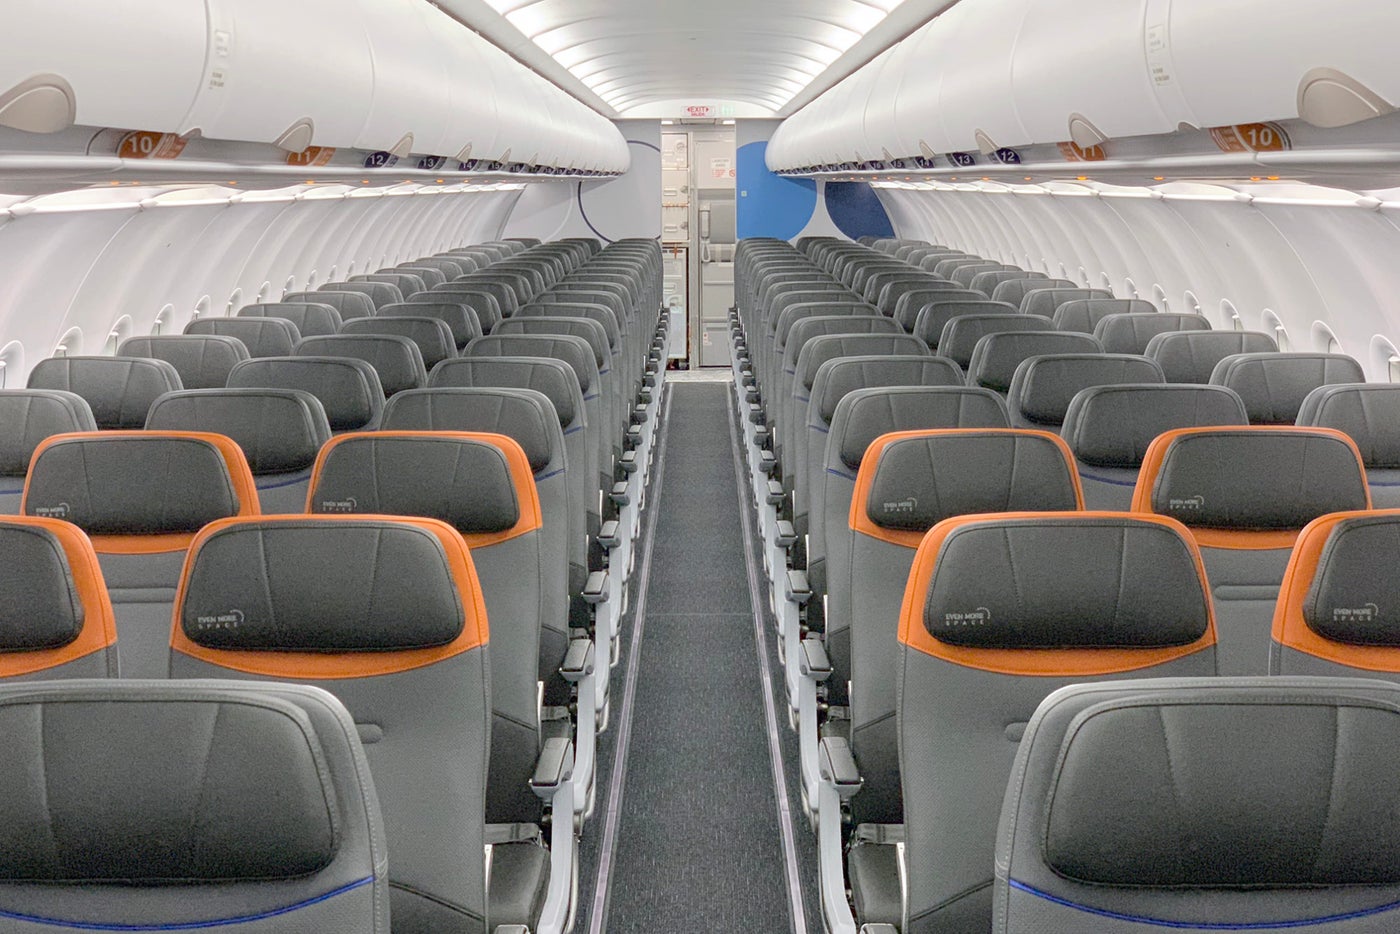 Where to Sit When Flying JetBlue's Retrofitted Airbus A320